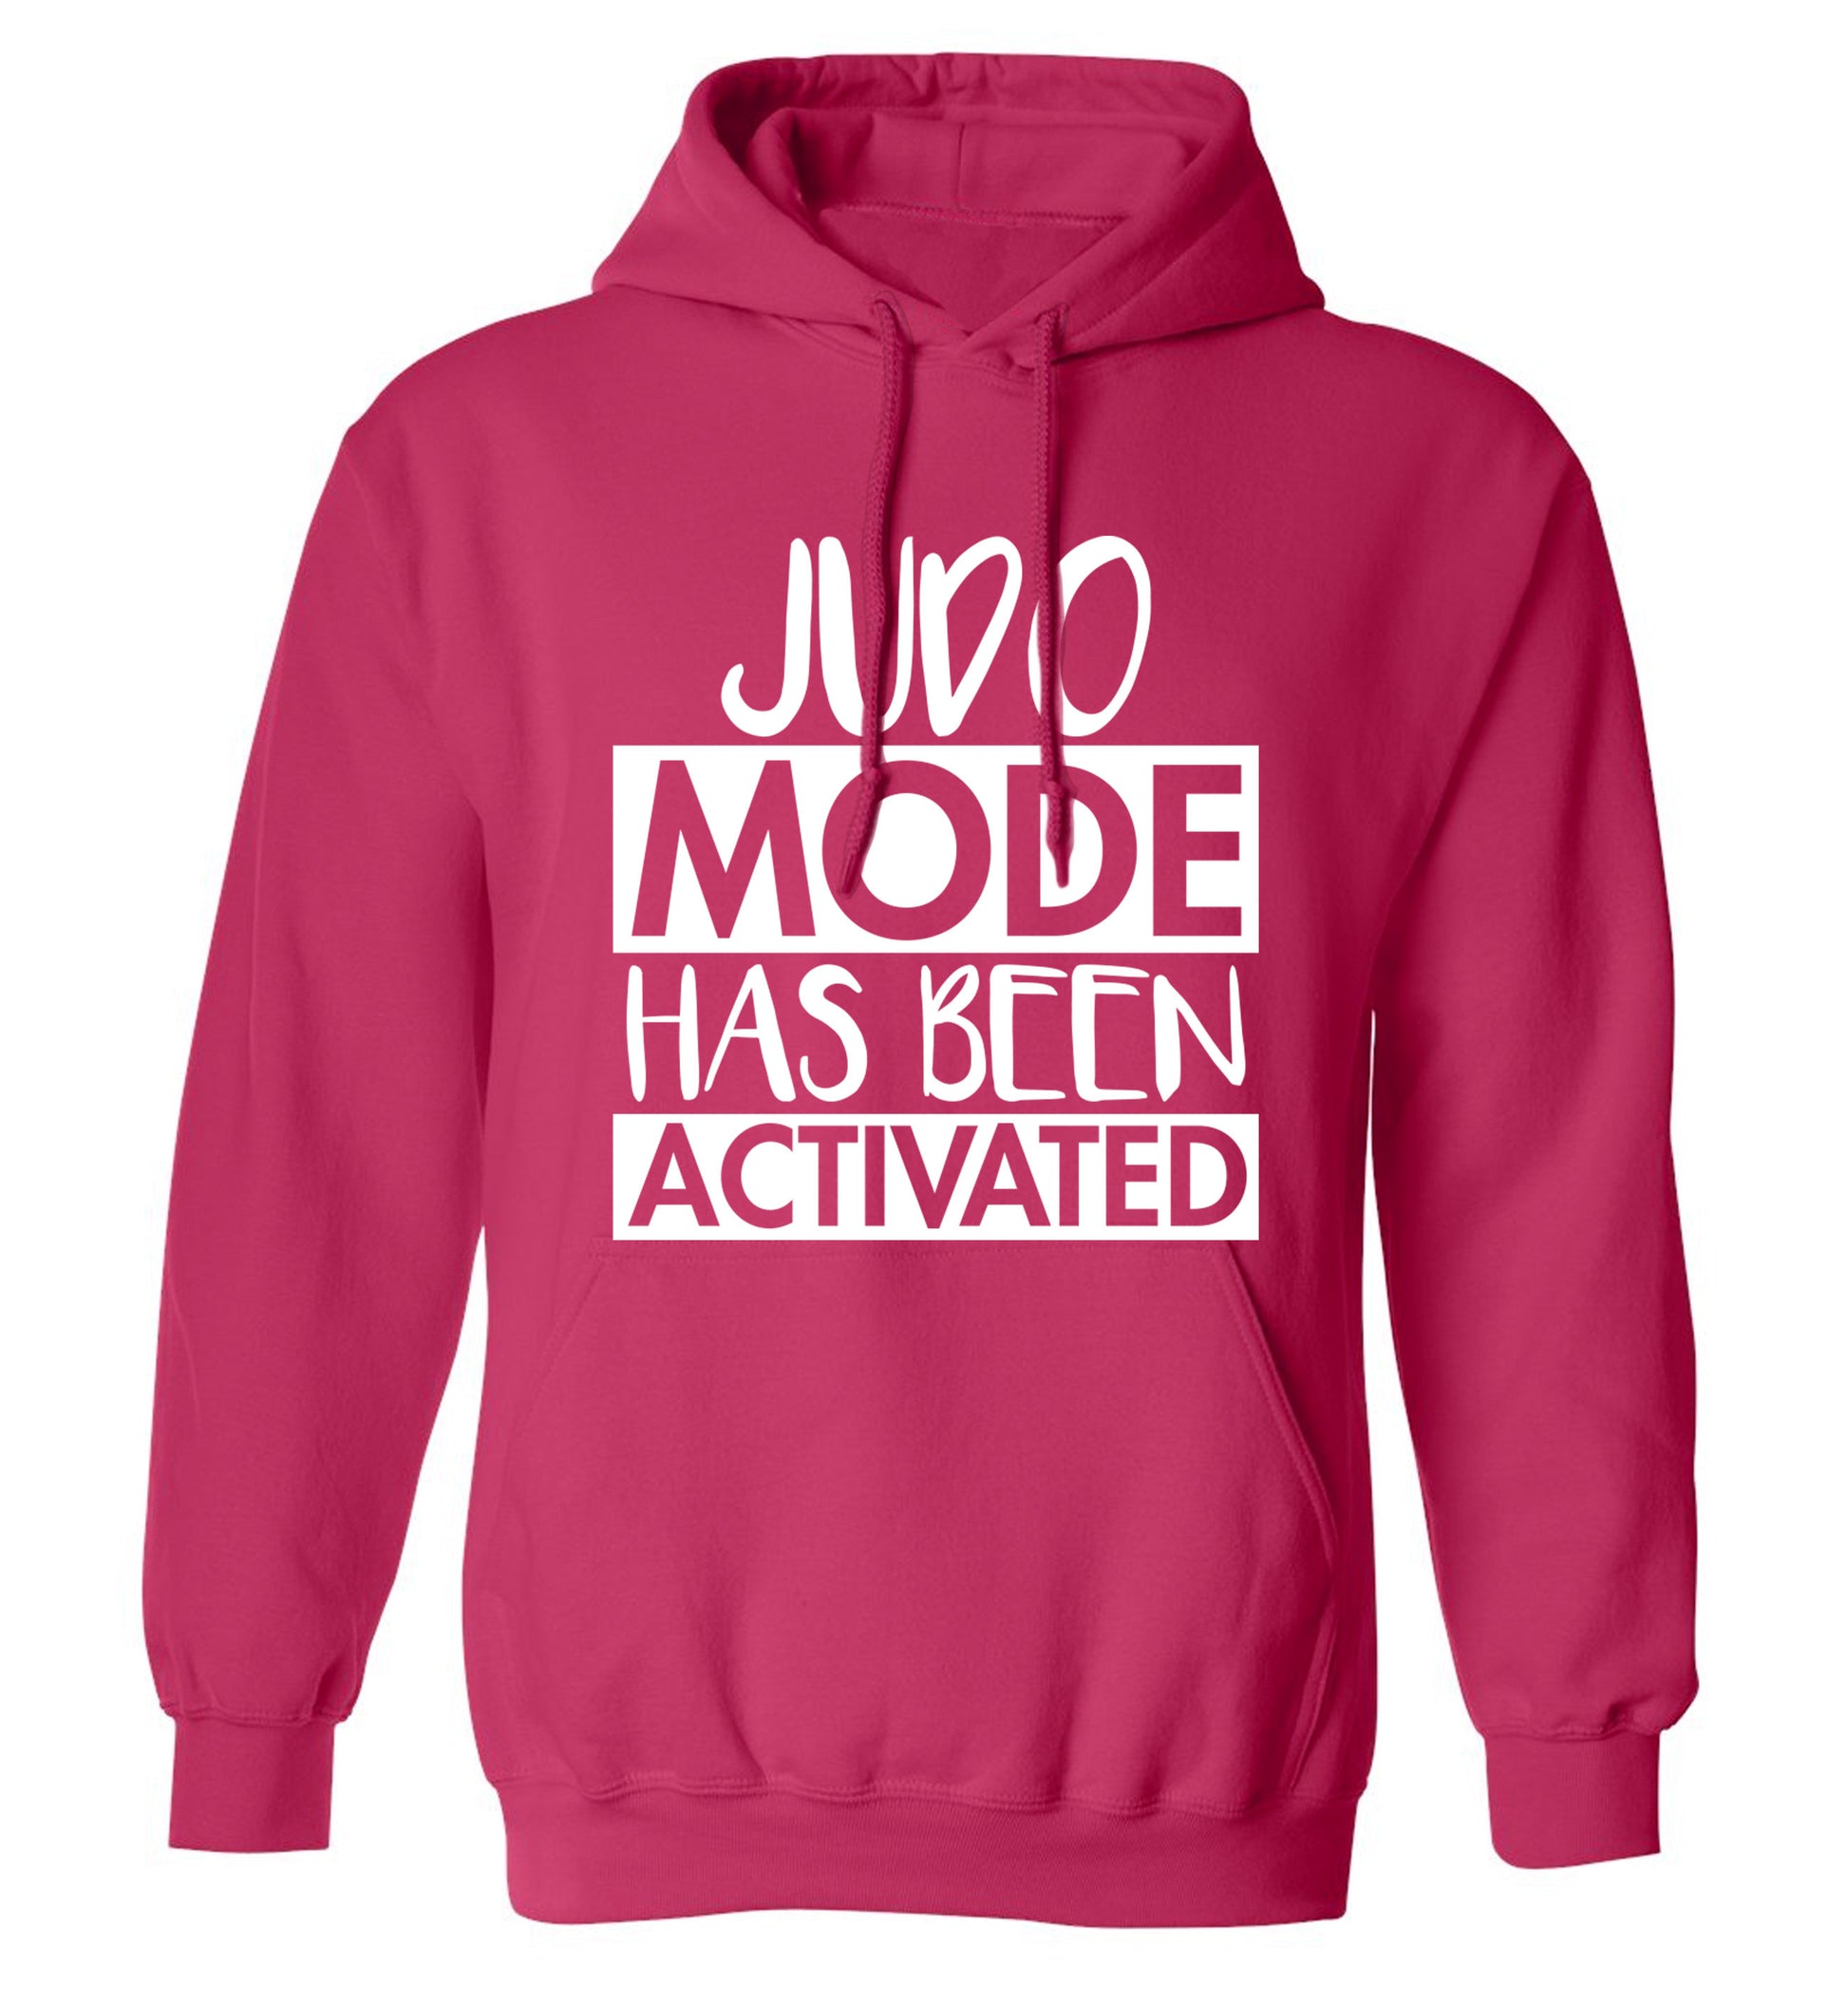 Judo mode activated adults unisex pink hoodie 2XL